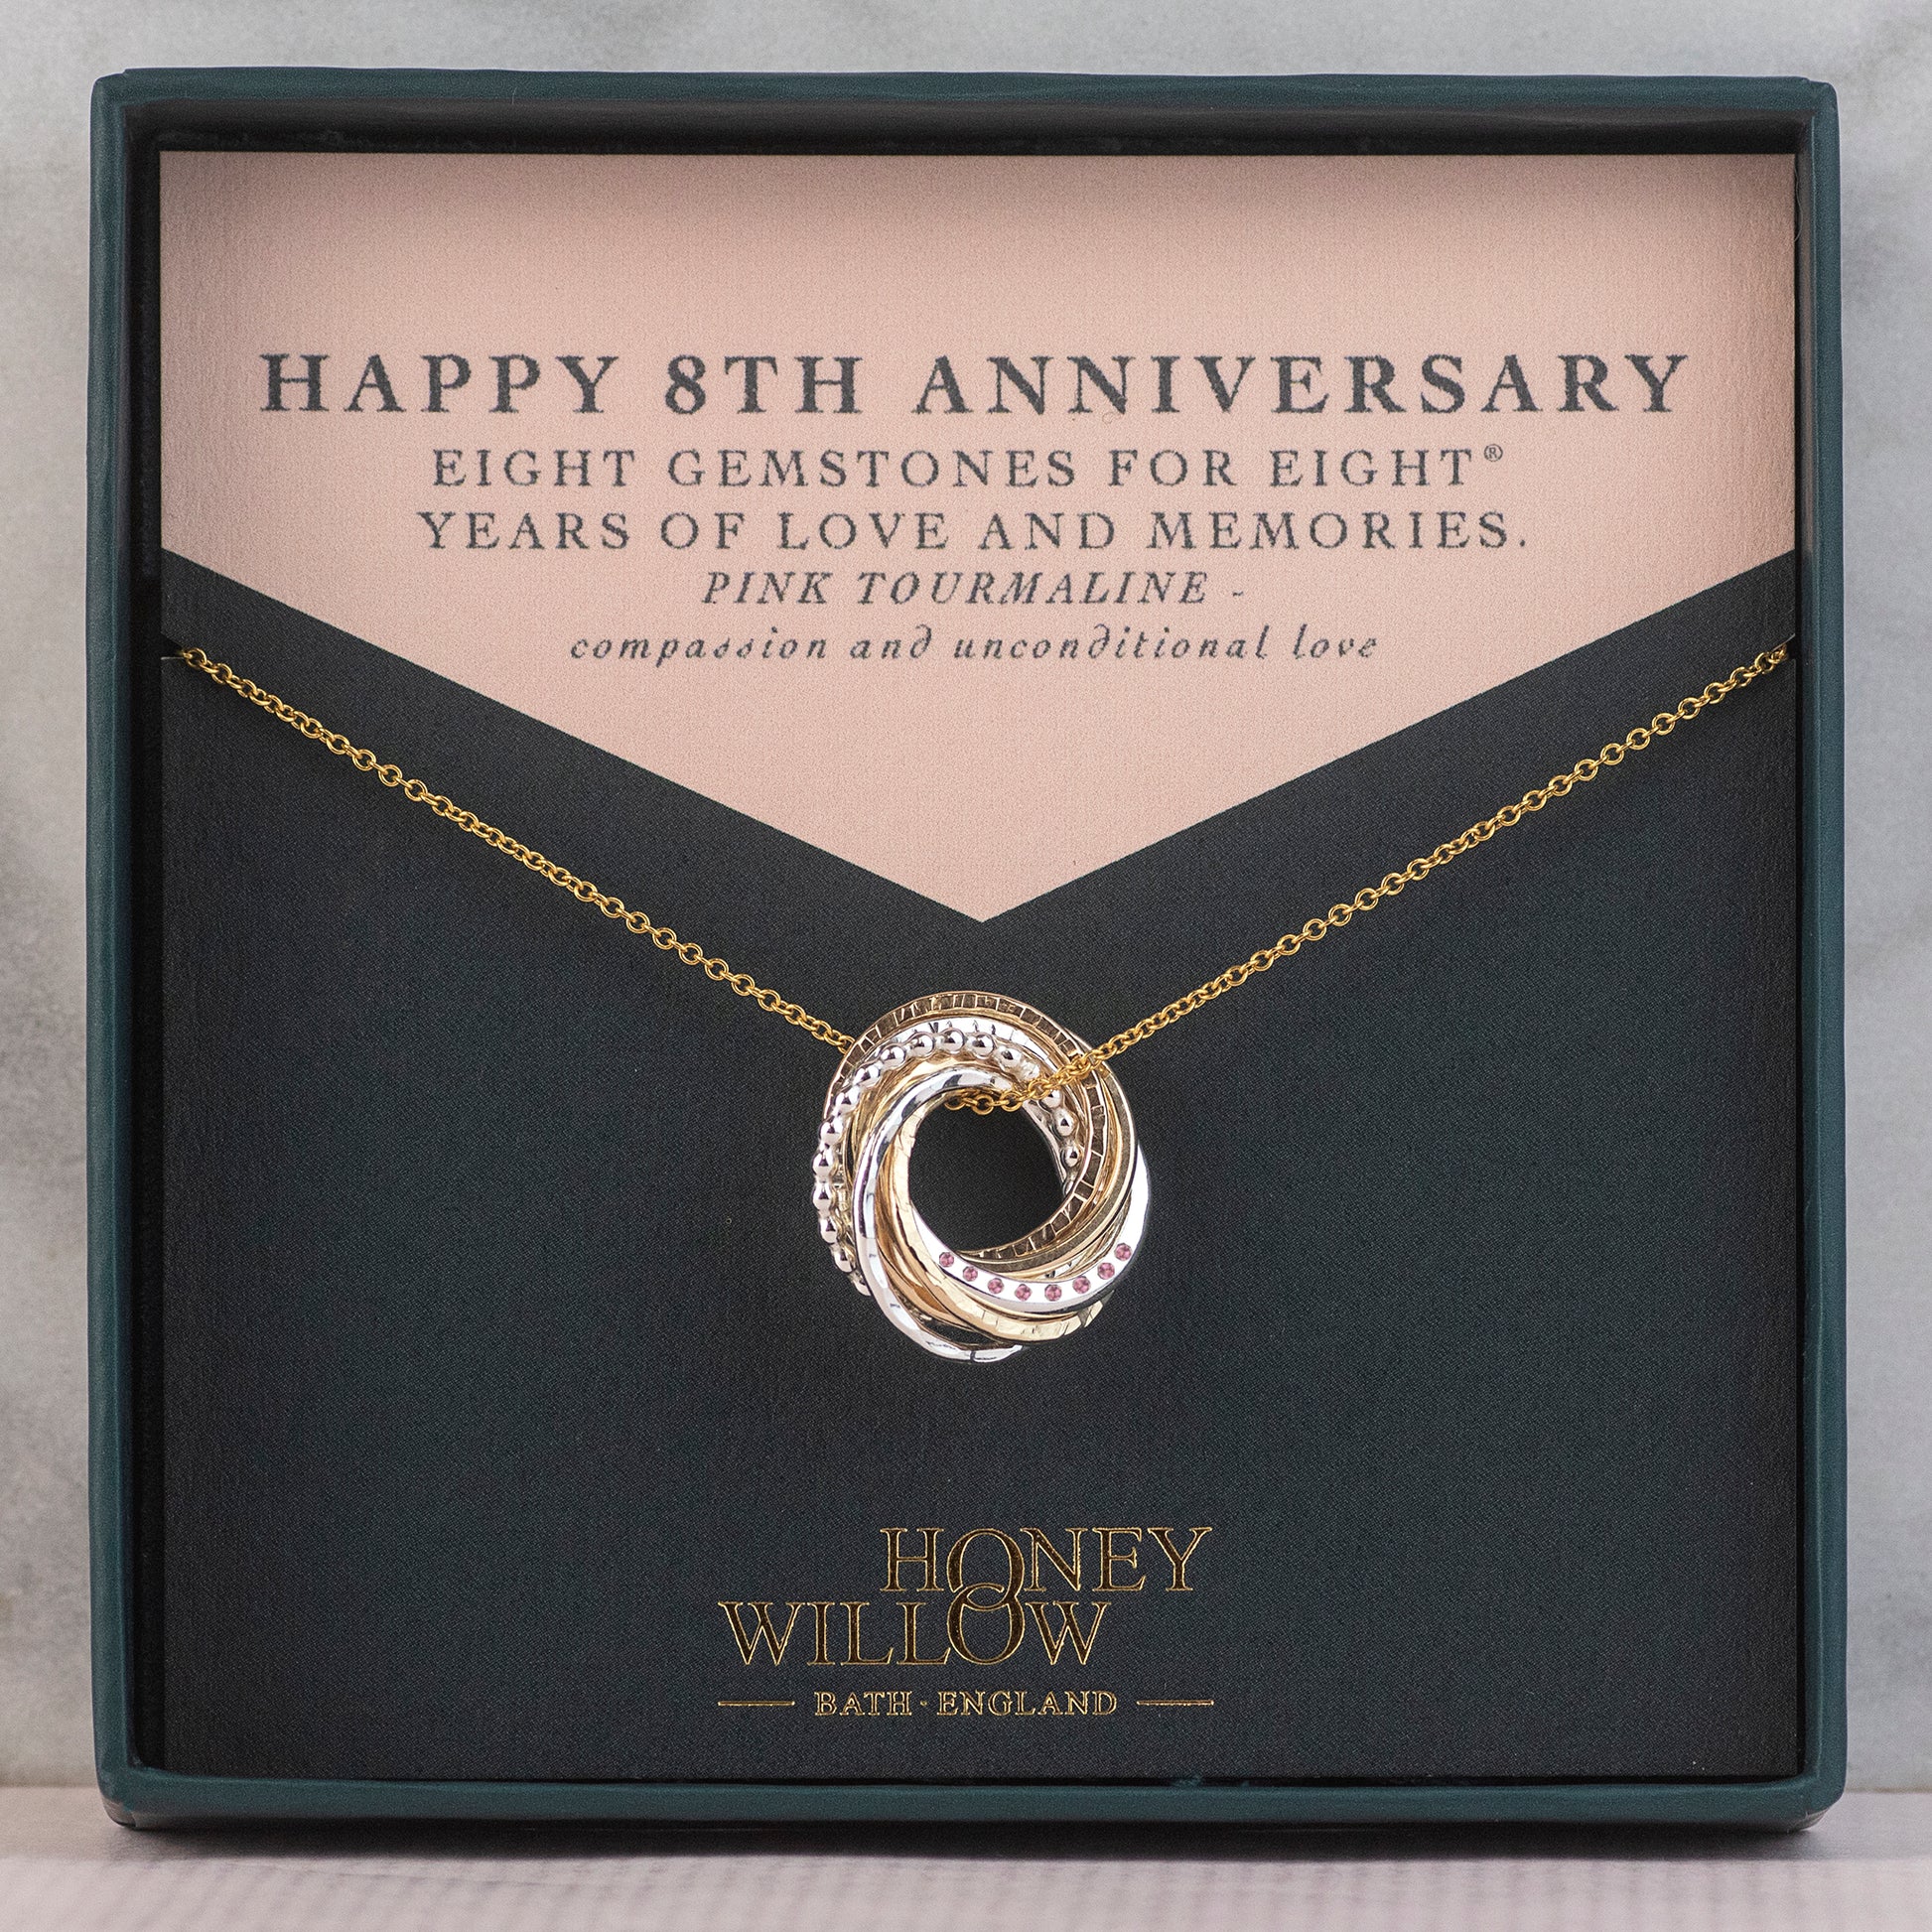 8th Anniversary Necklace - The Original 8 Rings for 8 Years Necklace - Silver & Gold - Tourmaline Anniversary